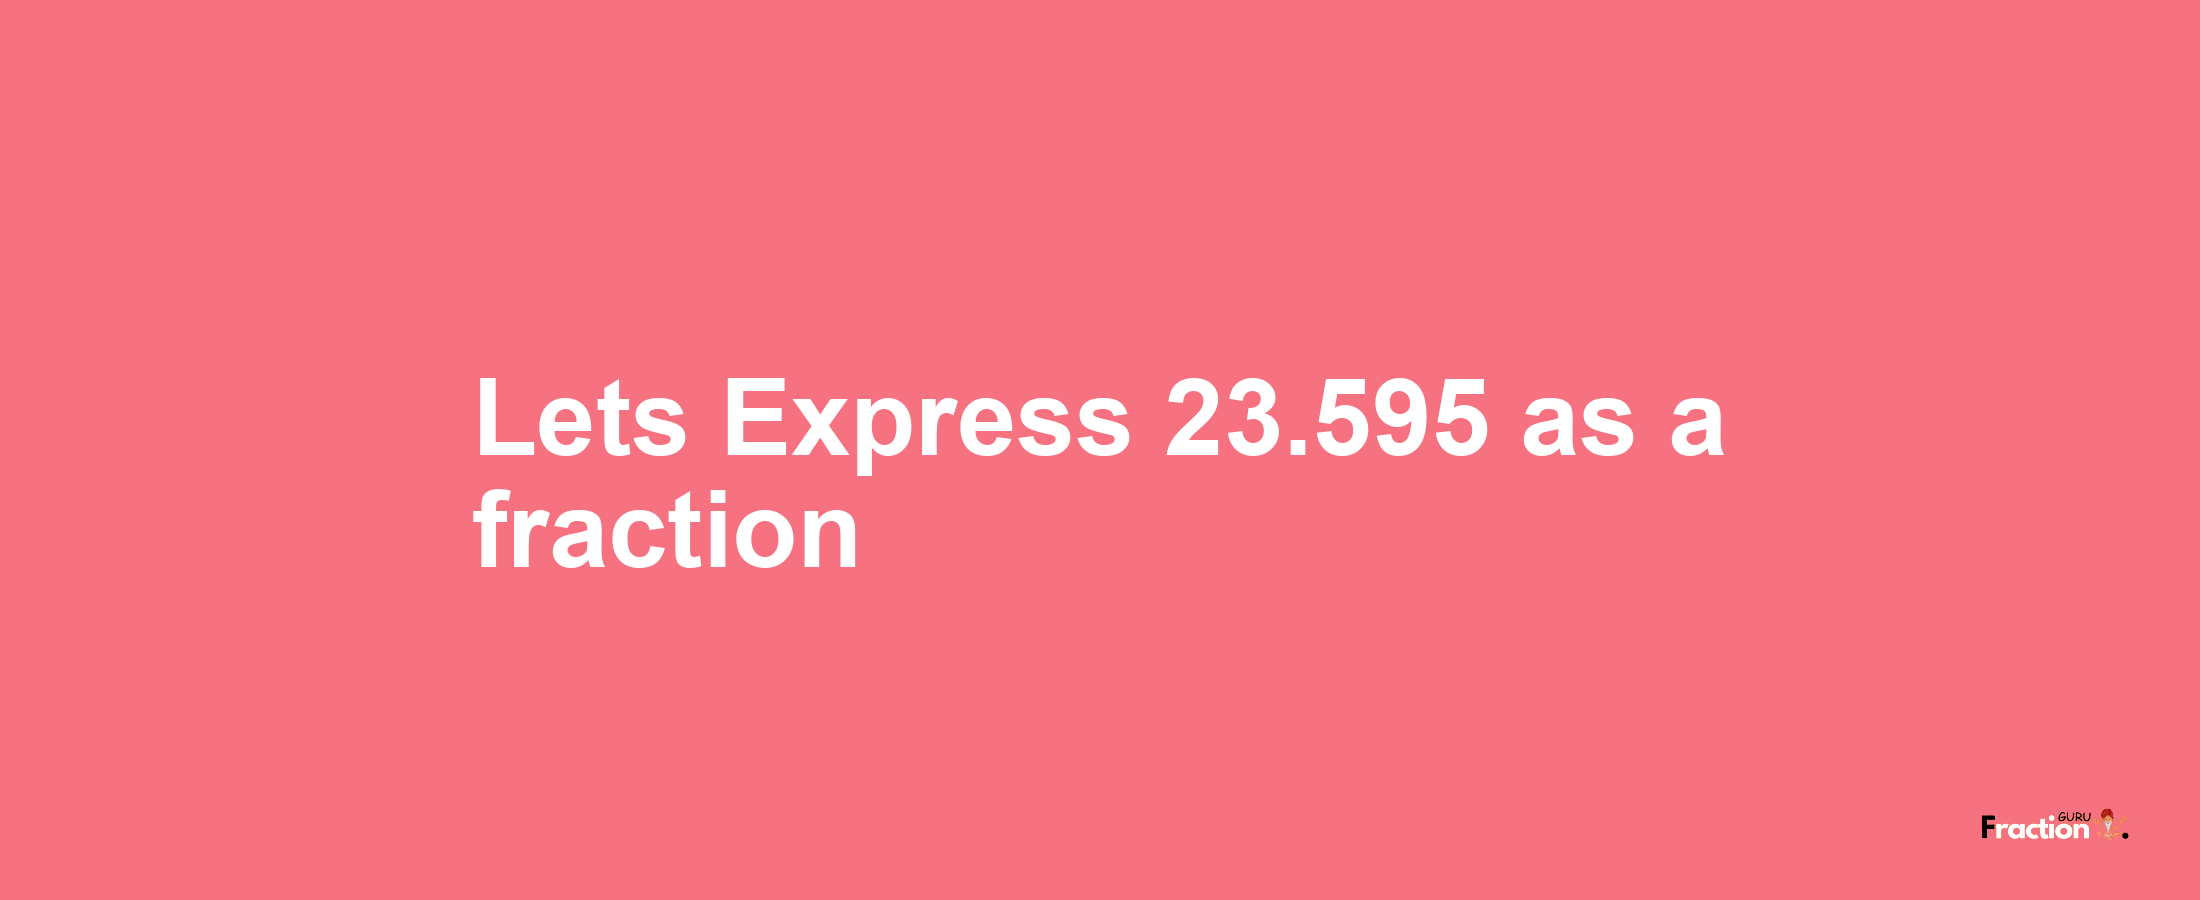 Lets Express 23.595 as afraction